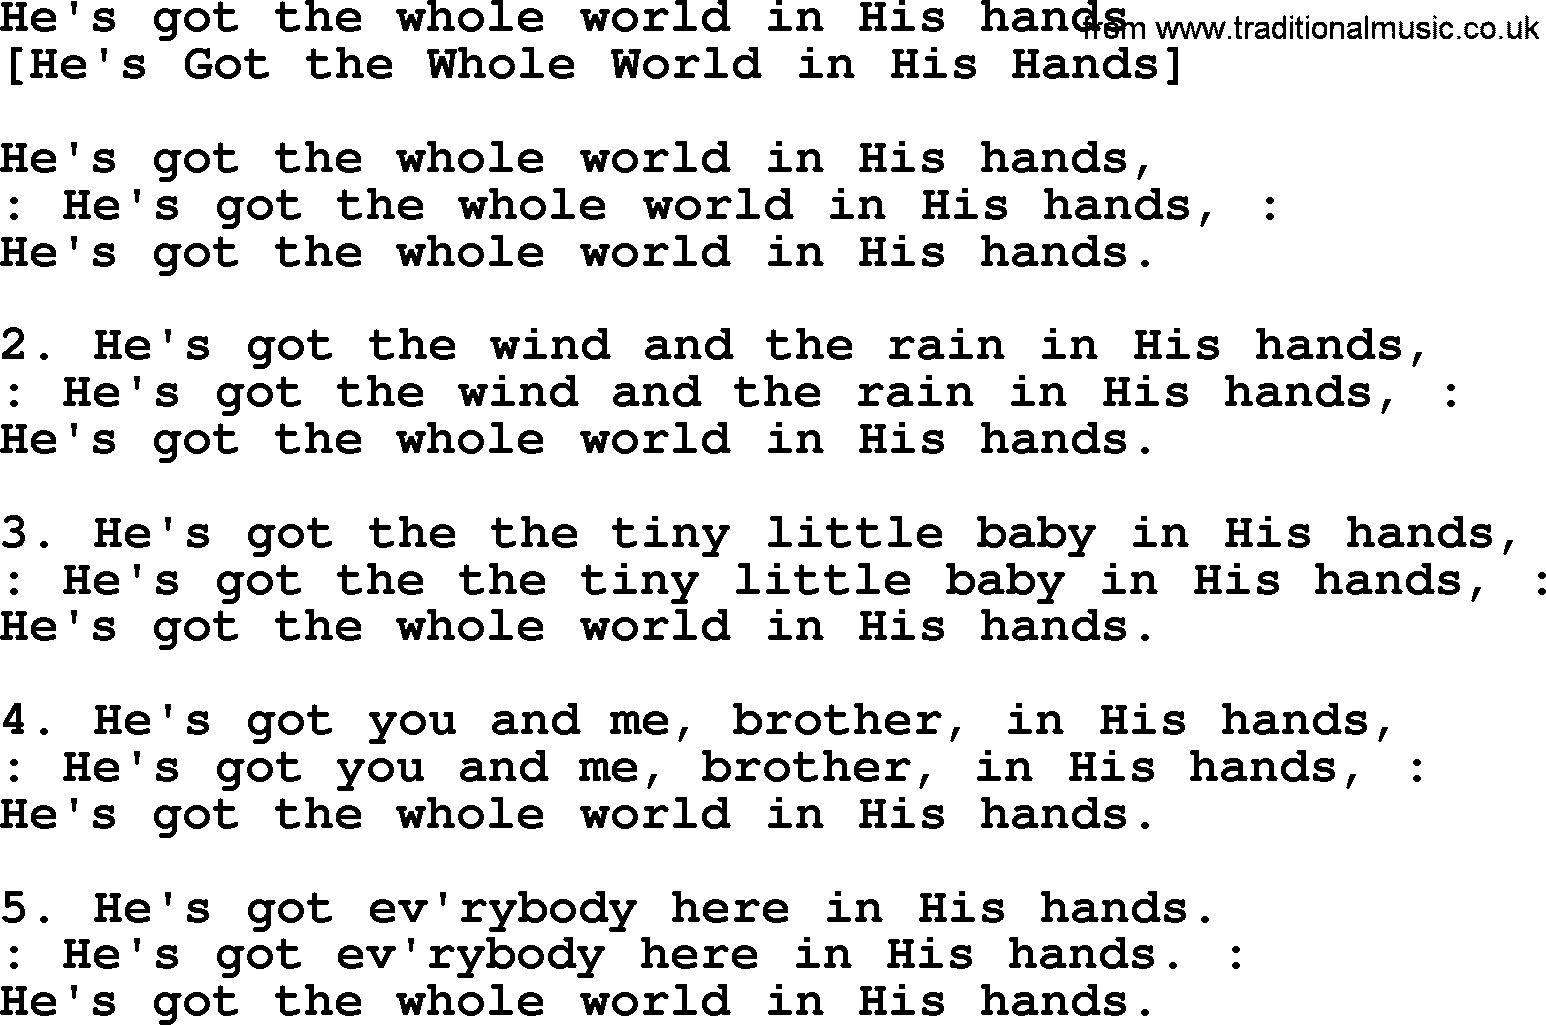 old-american-song-lyrics-for-he-s-got-the-whole-world-in-his-hands